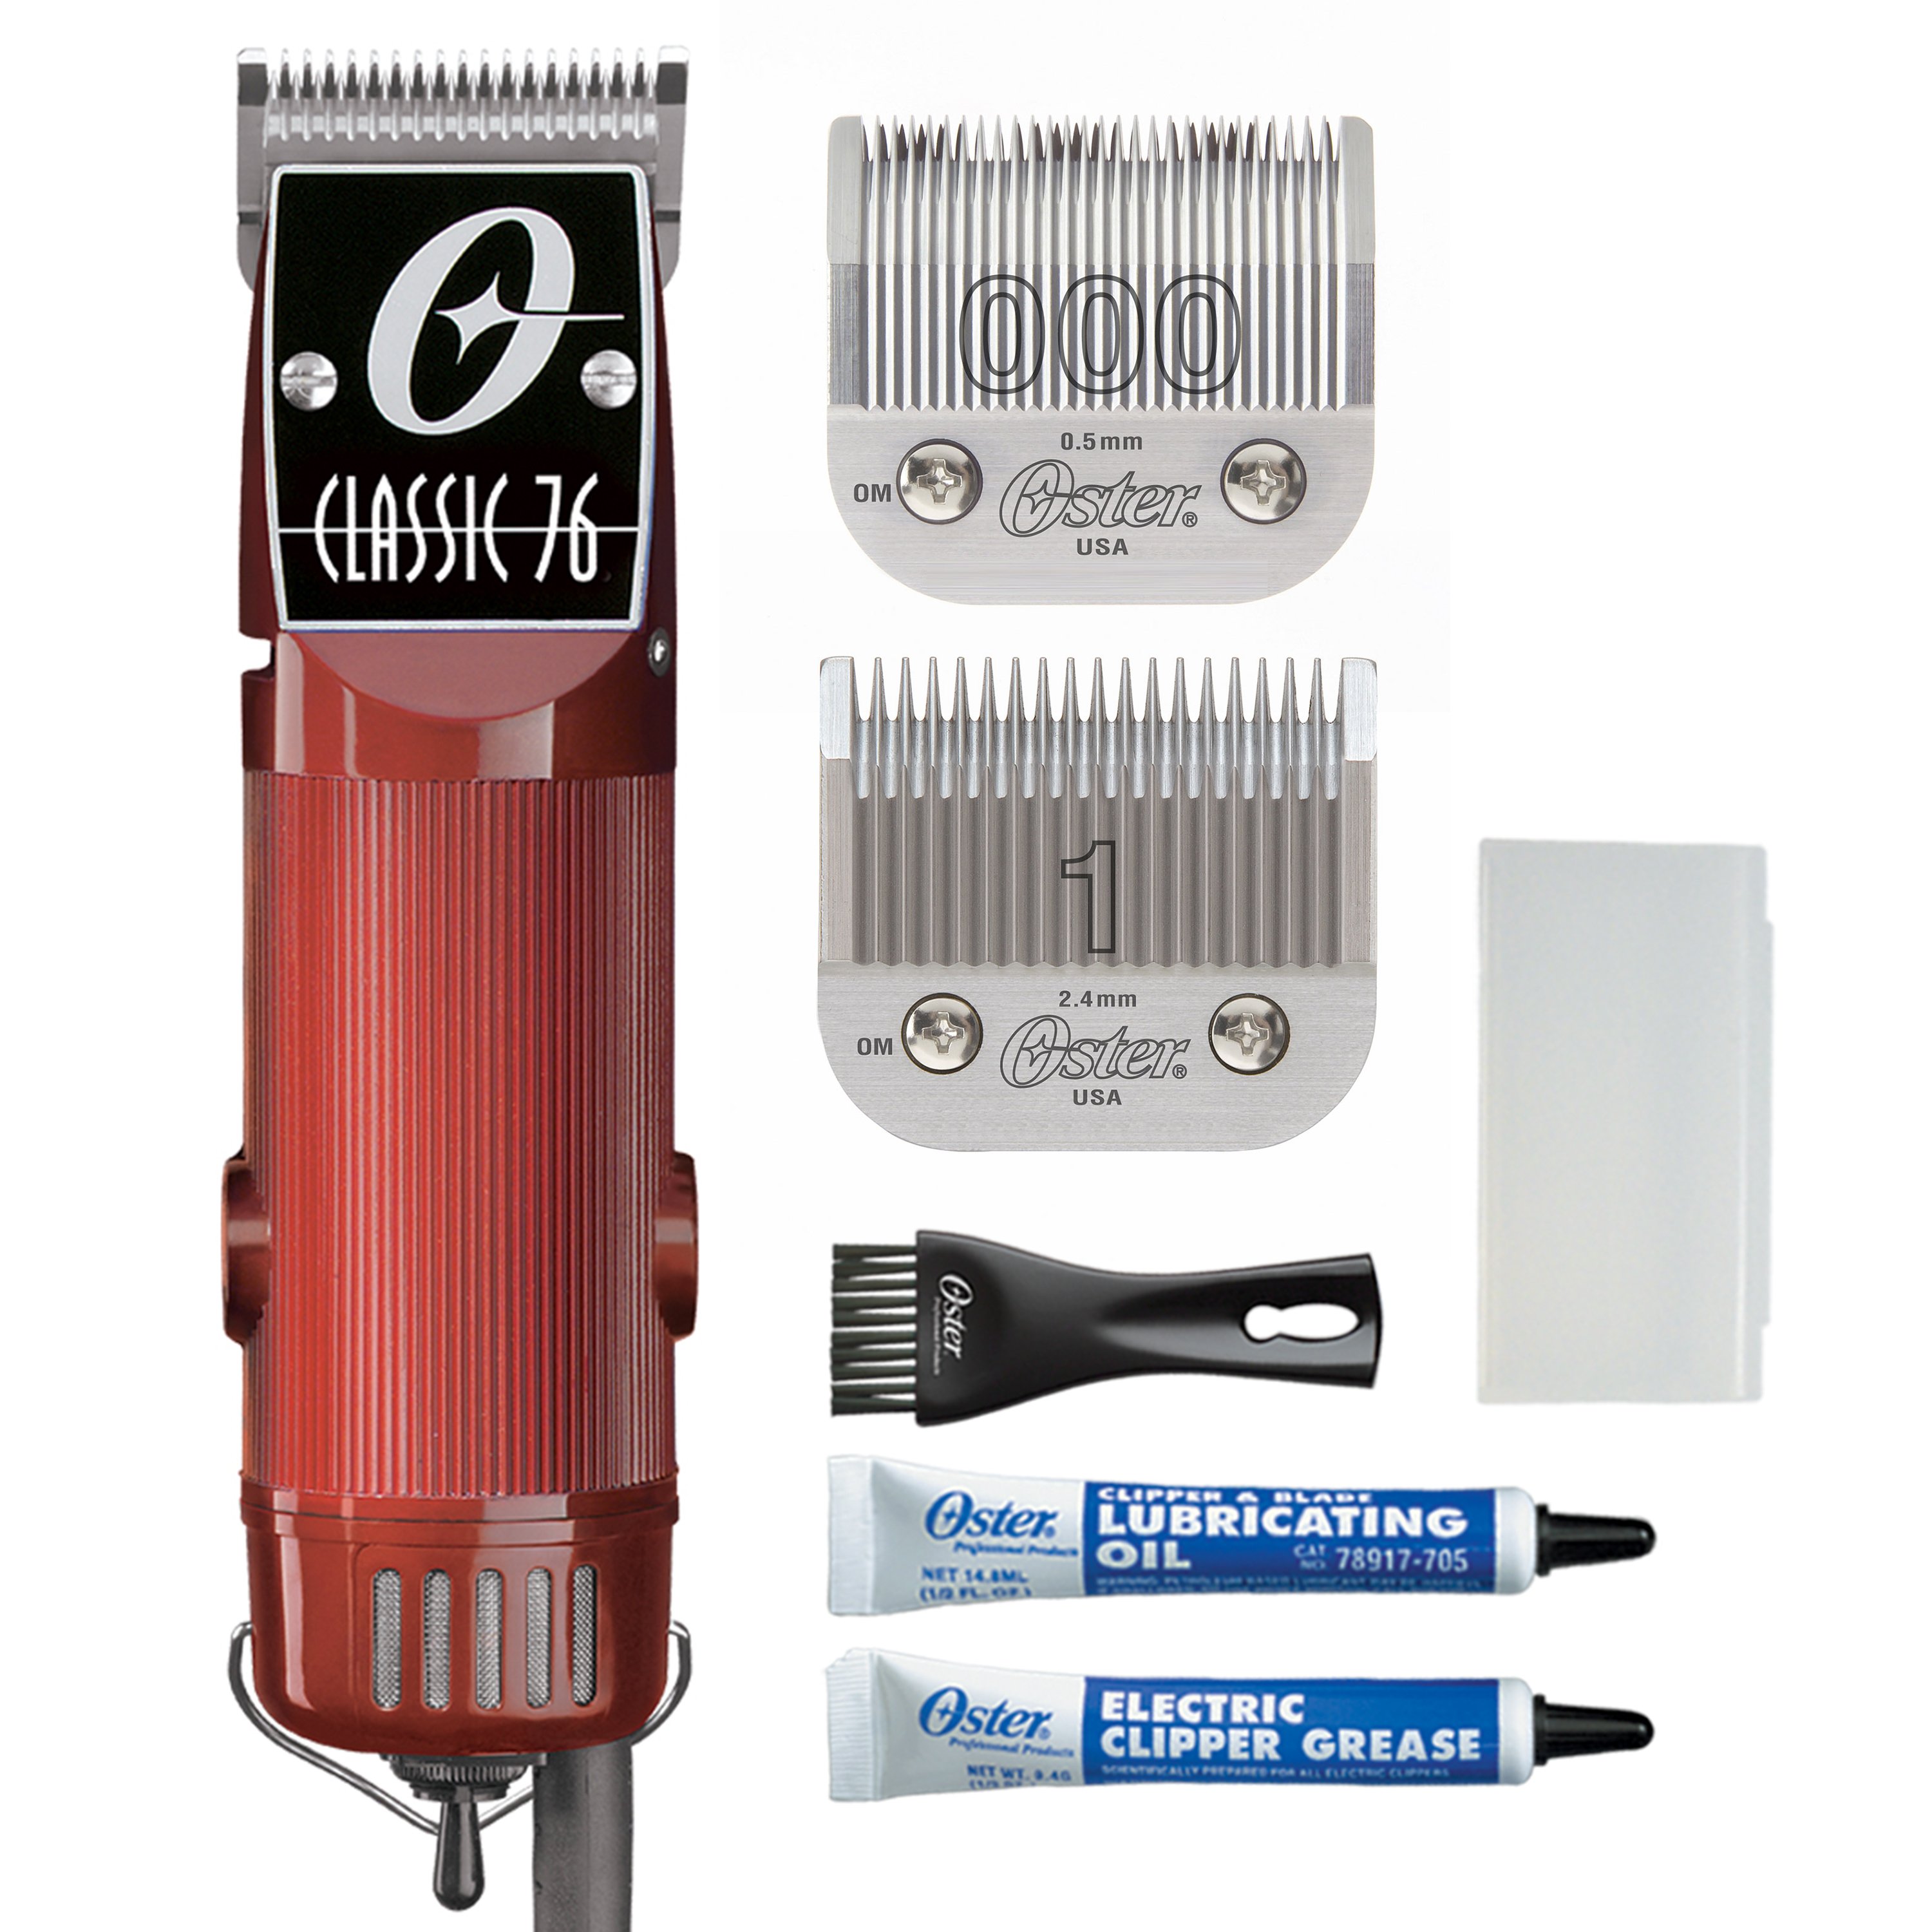 Oster Classic 76 Hair Clipper Bundle Items, Includes Pack of Plastic Comb Blades